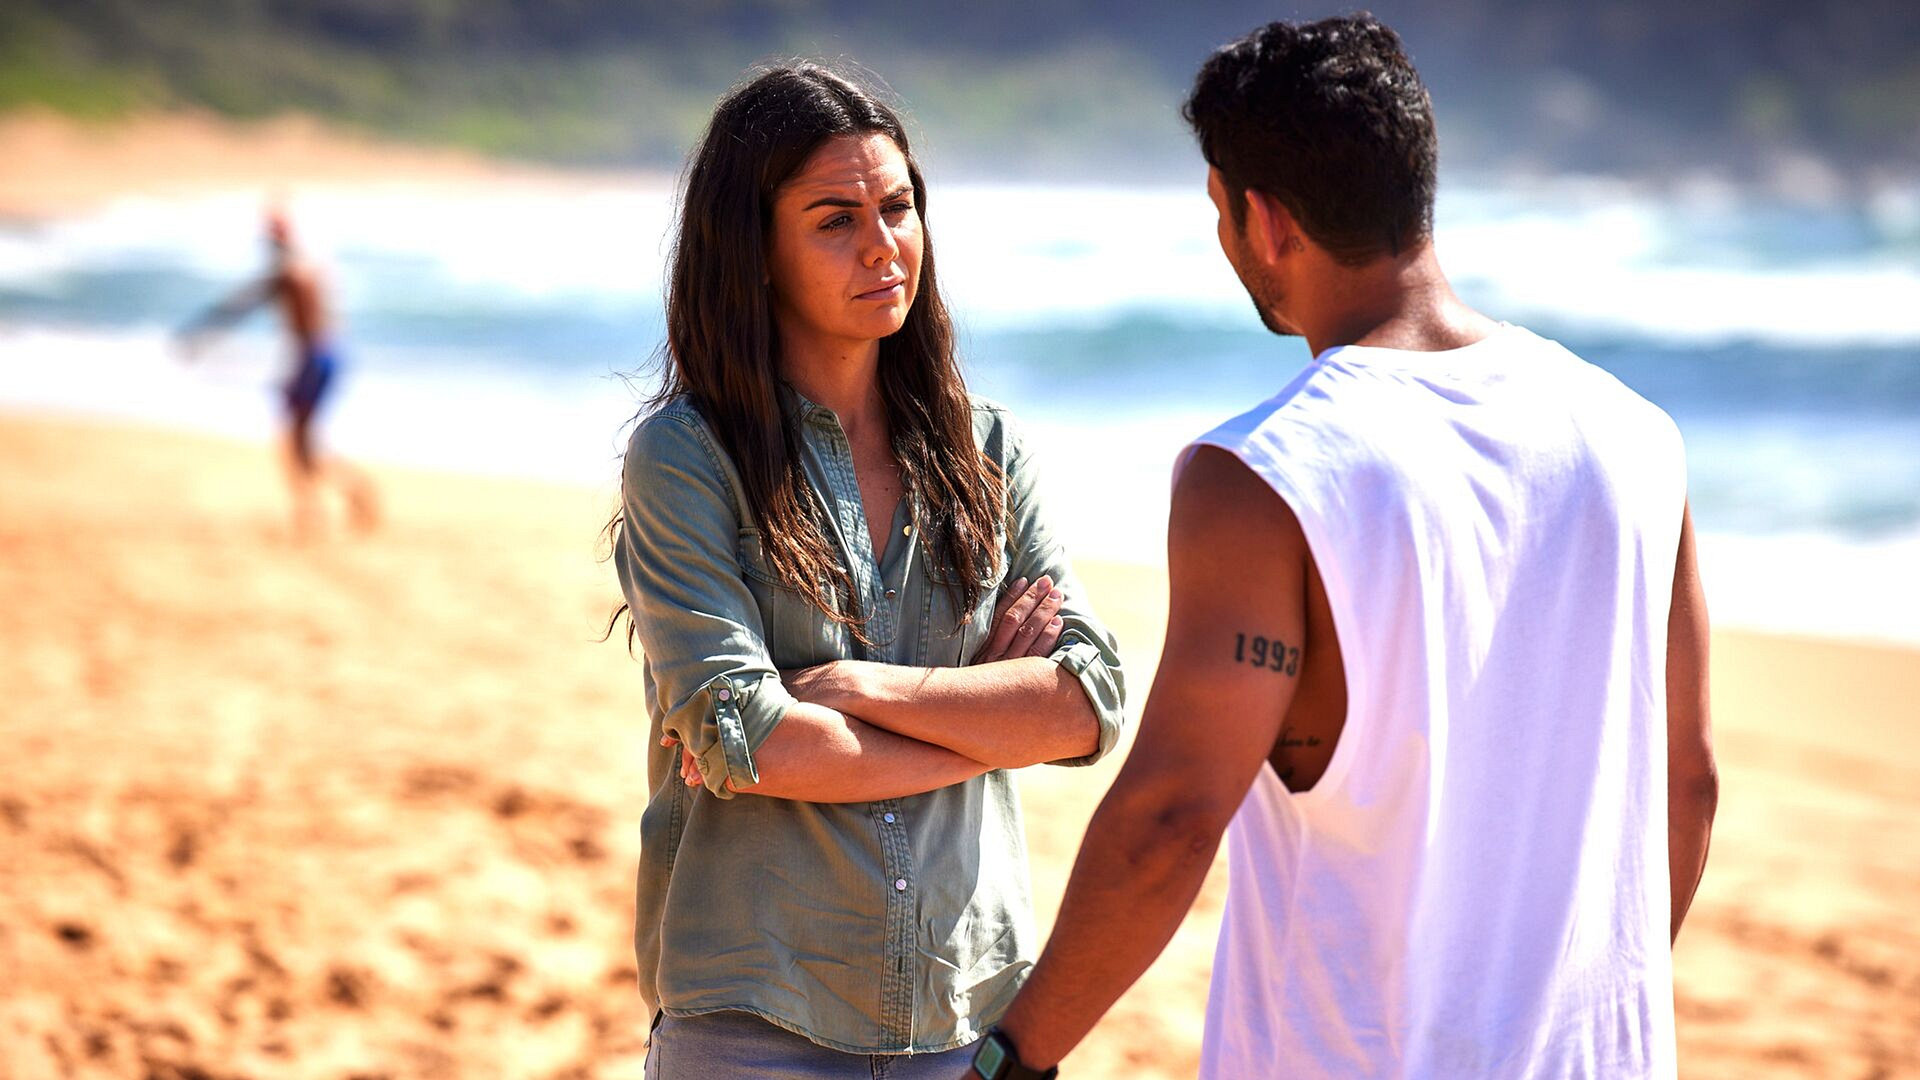 Home and Away (35) - episode 135